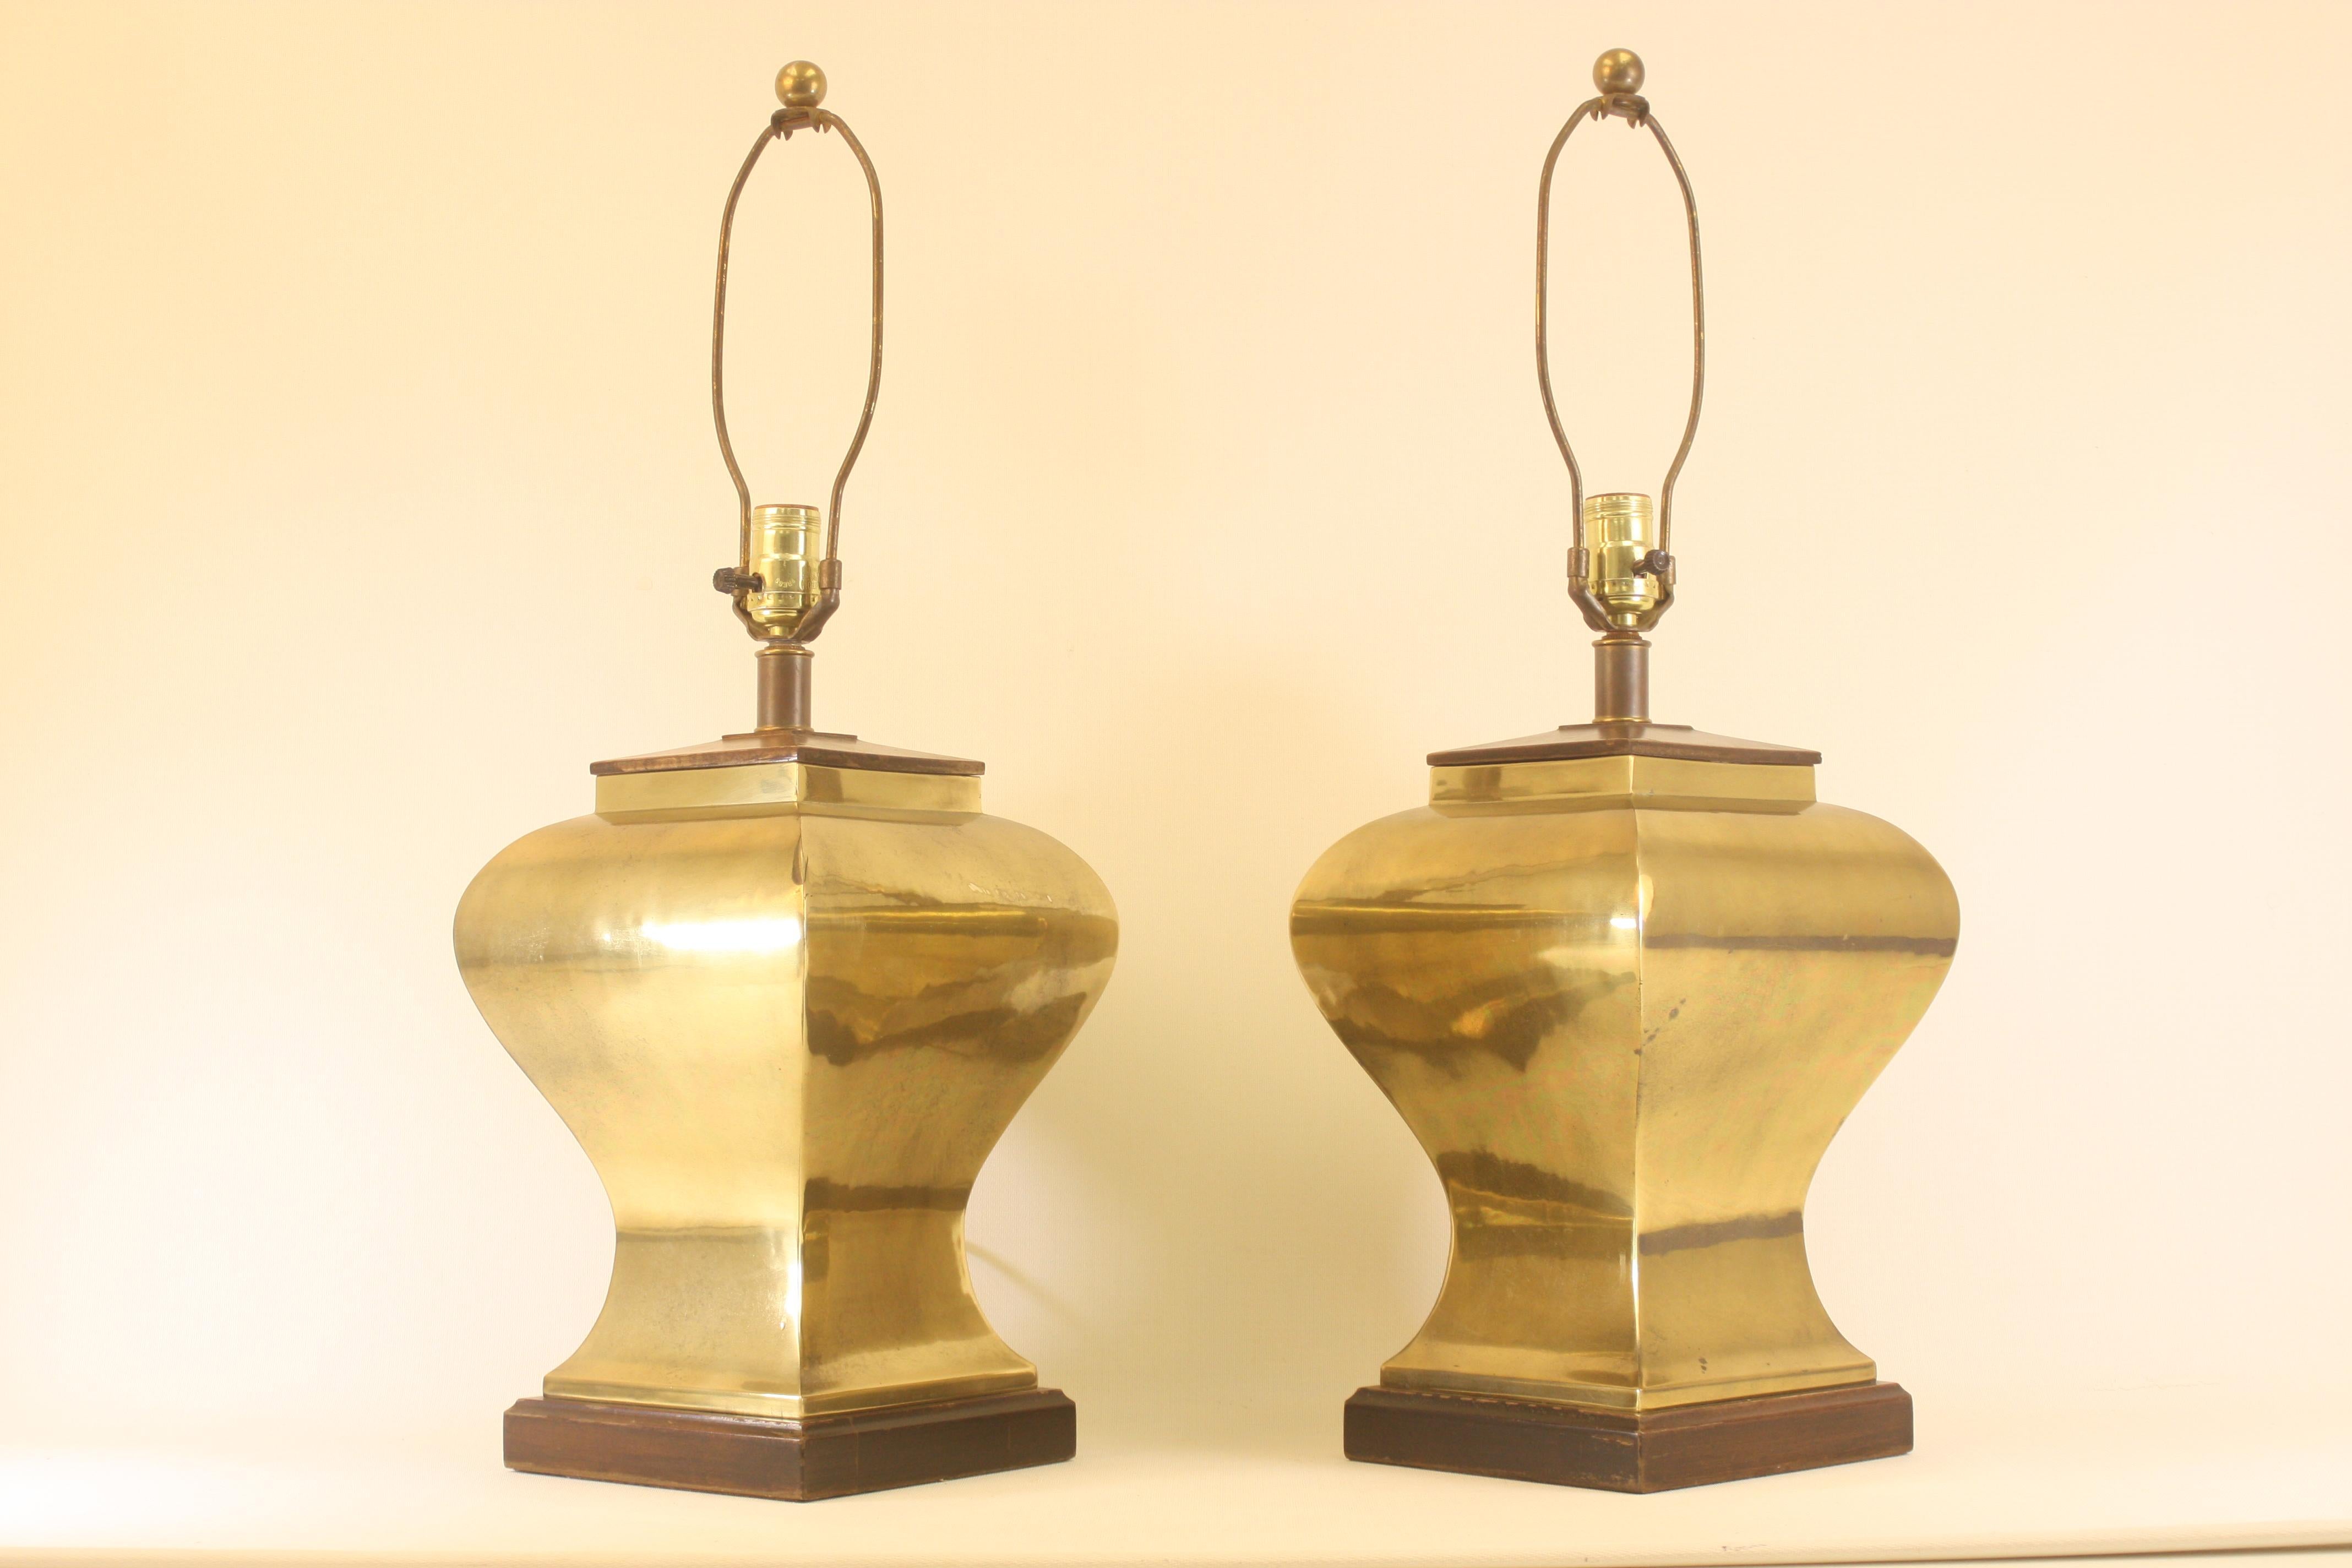 Anodized Pair of Brass Table Lamps by Tyndale Lighting For Sale